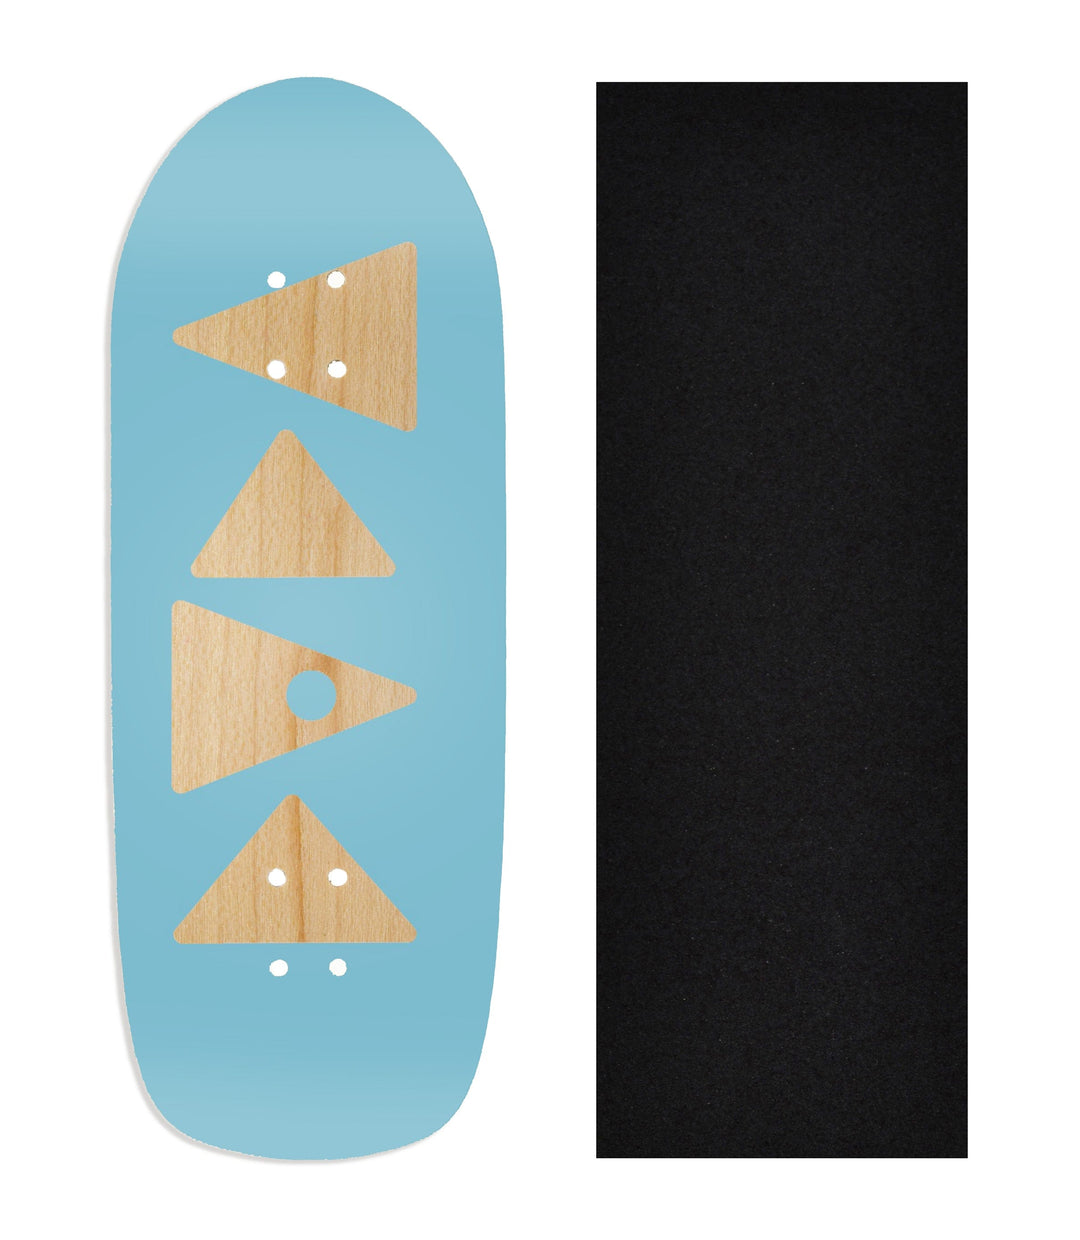 Teak Tuning Heat Transfer Graphic Wooden Fingerboard Deck, @smil37_fb - Entry #100 Poolparty Deck